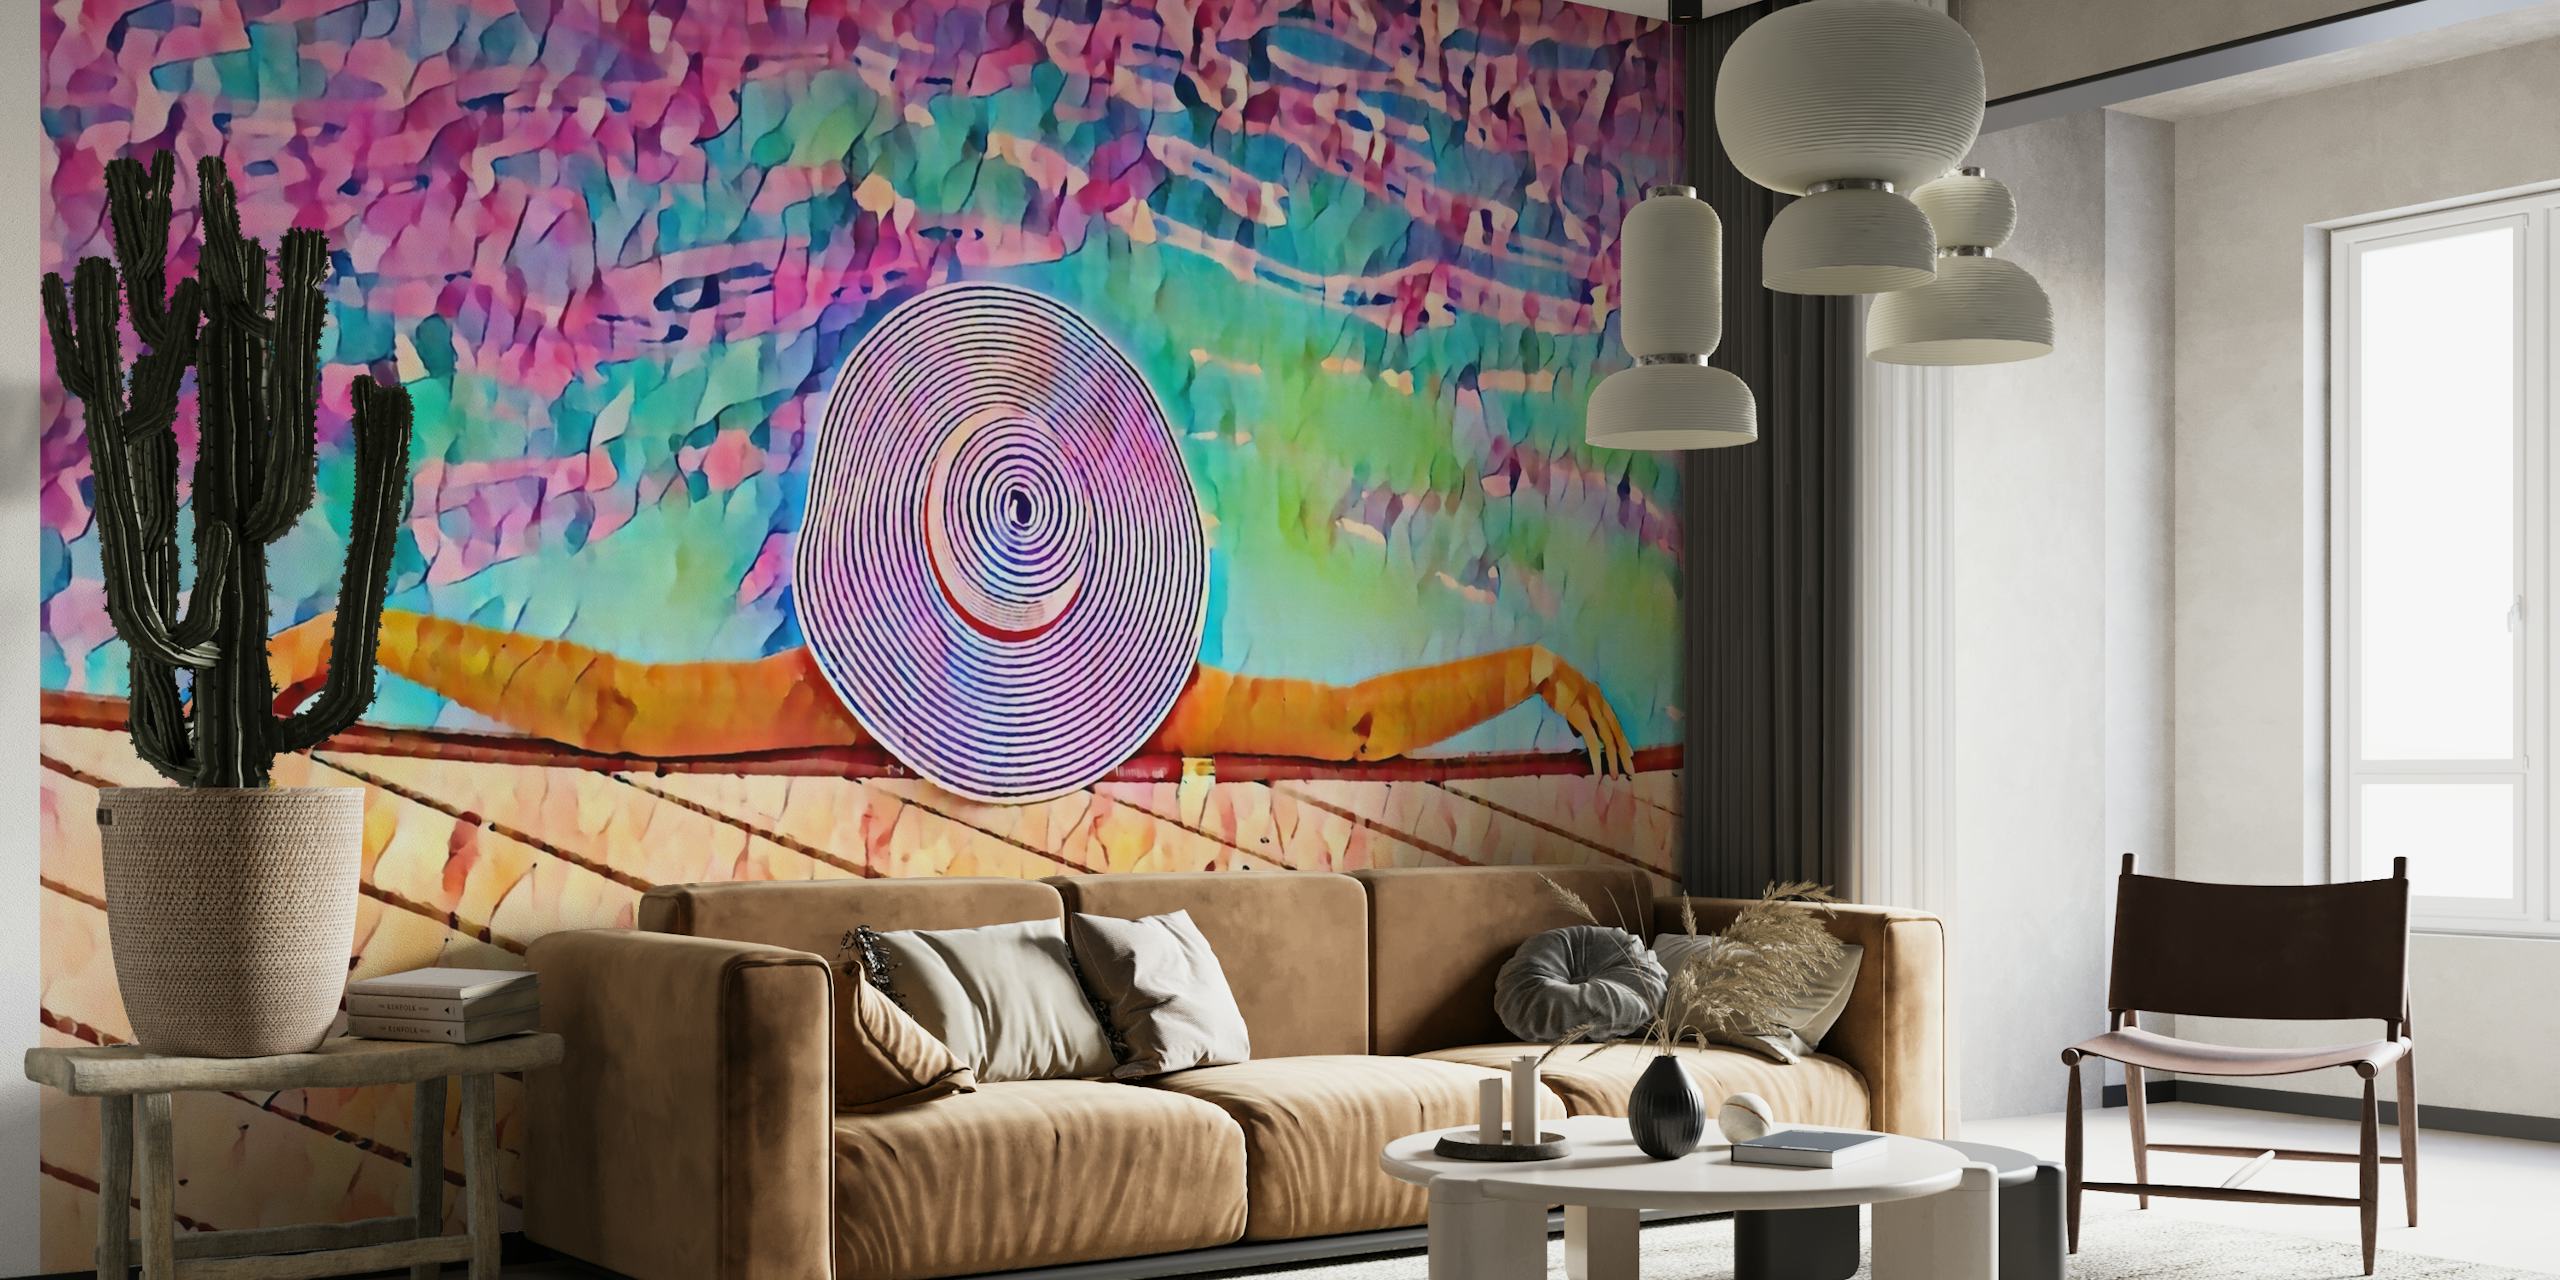 Palm Springs poolside themed wall mural with vibrant colors and a retro feel